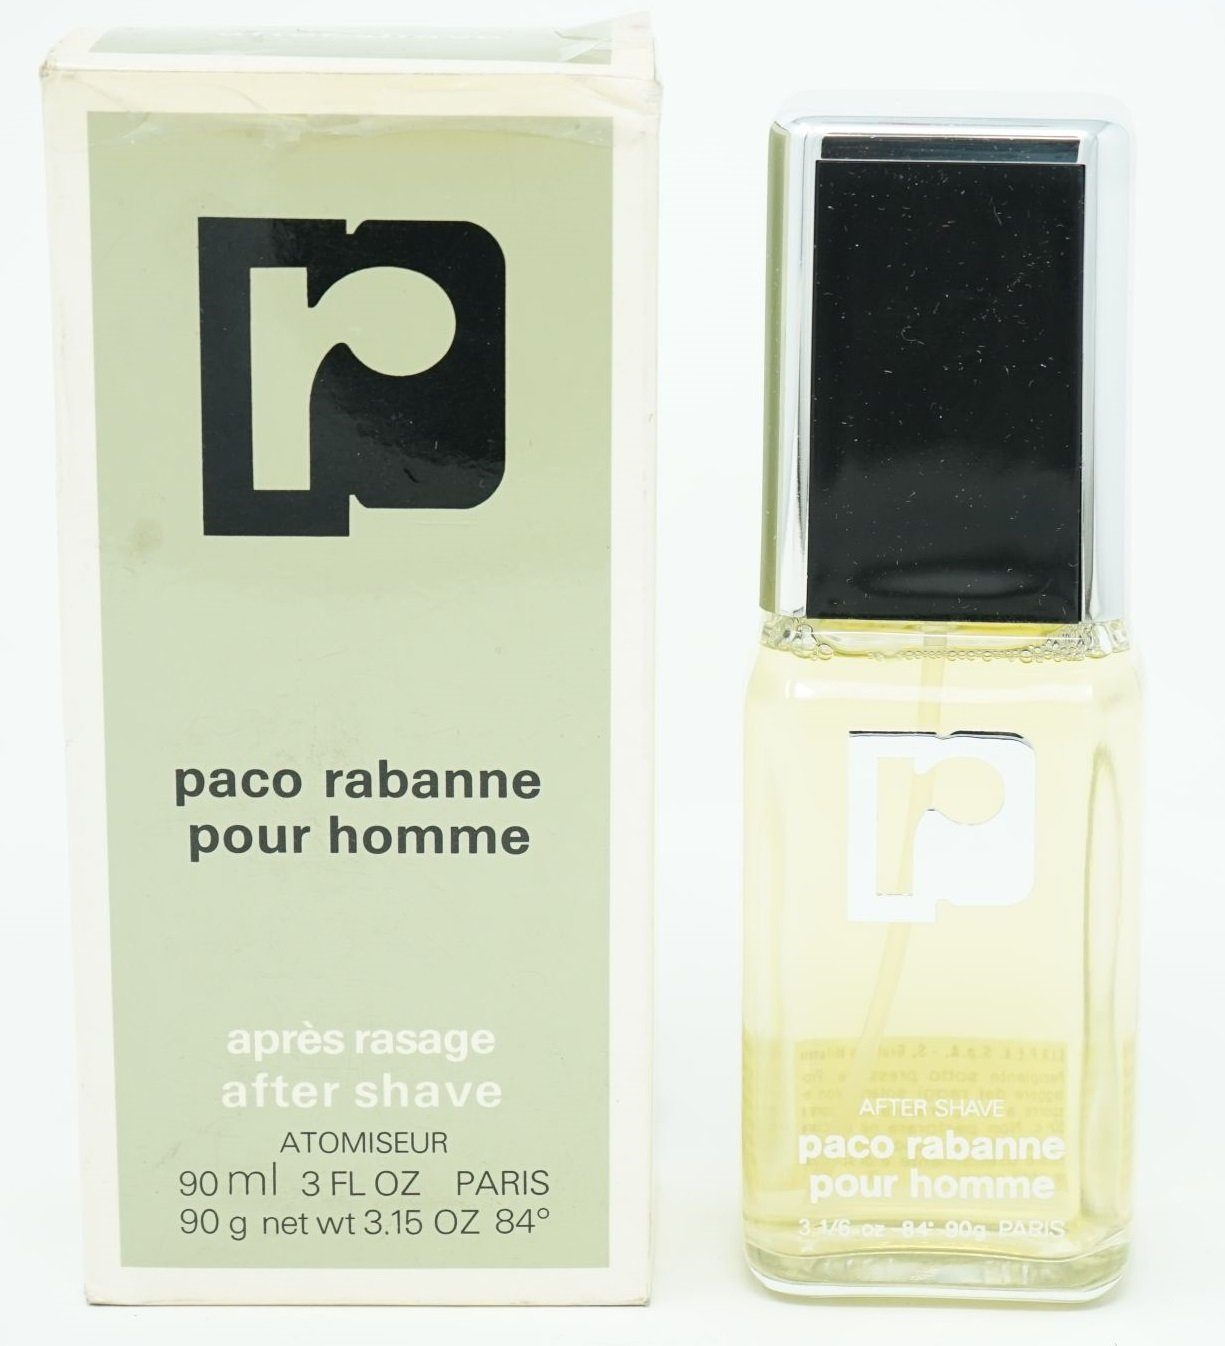 paco rabanne After-Shave Paco Rabanne Pour ml Atomiseur 90 Shave Homme After